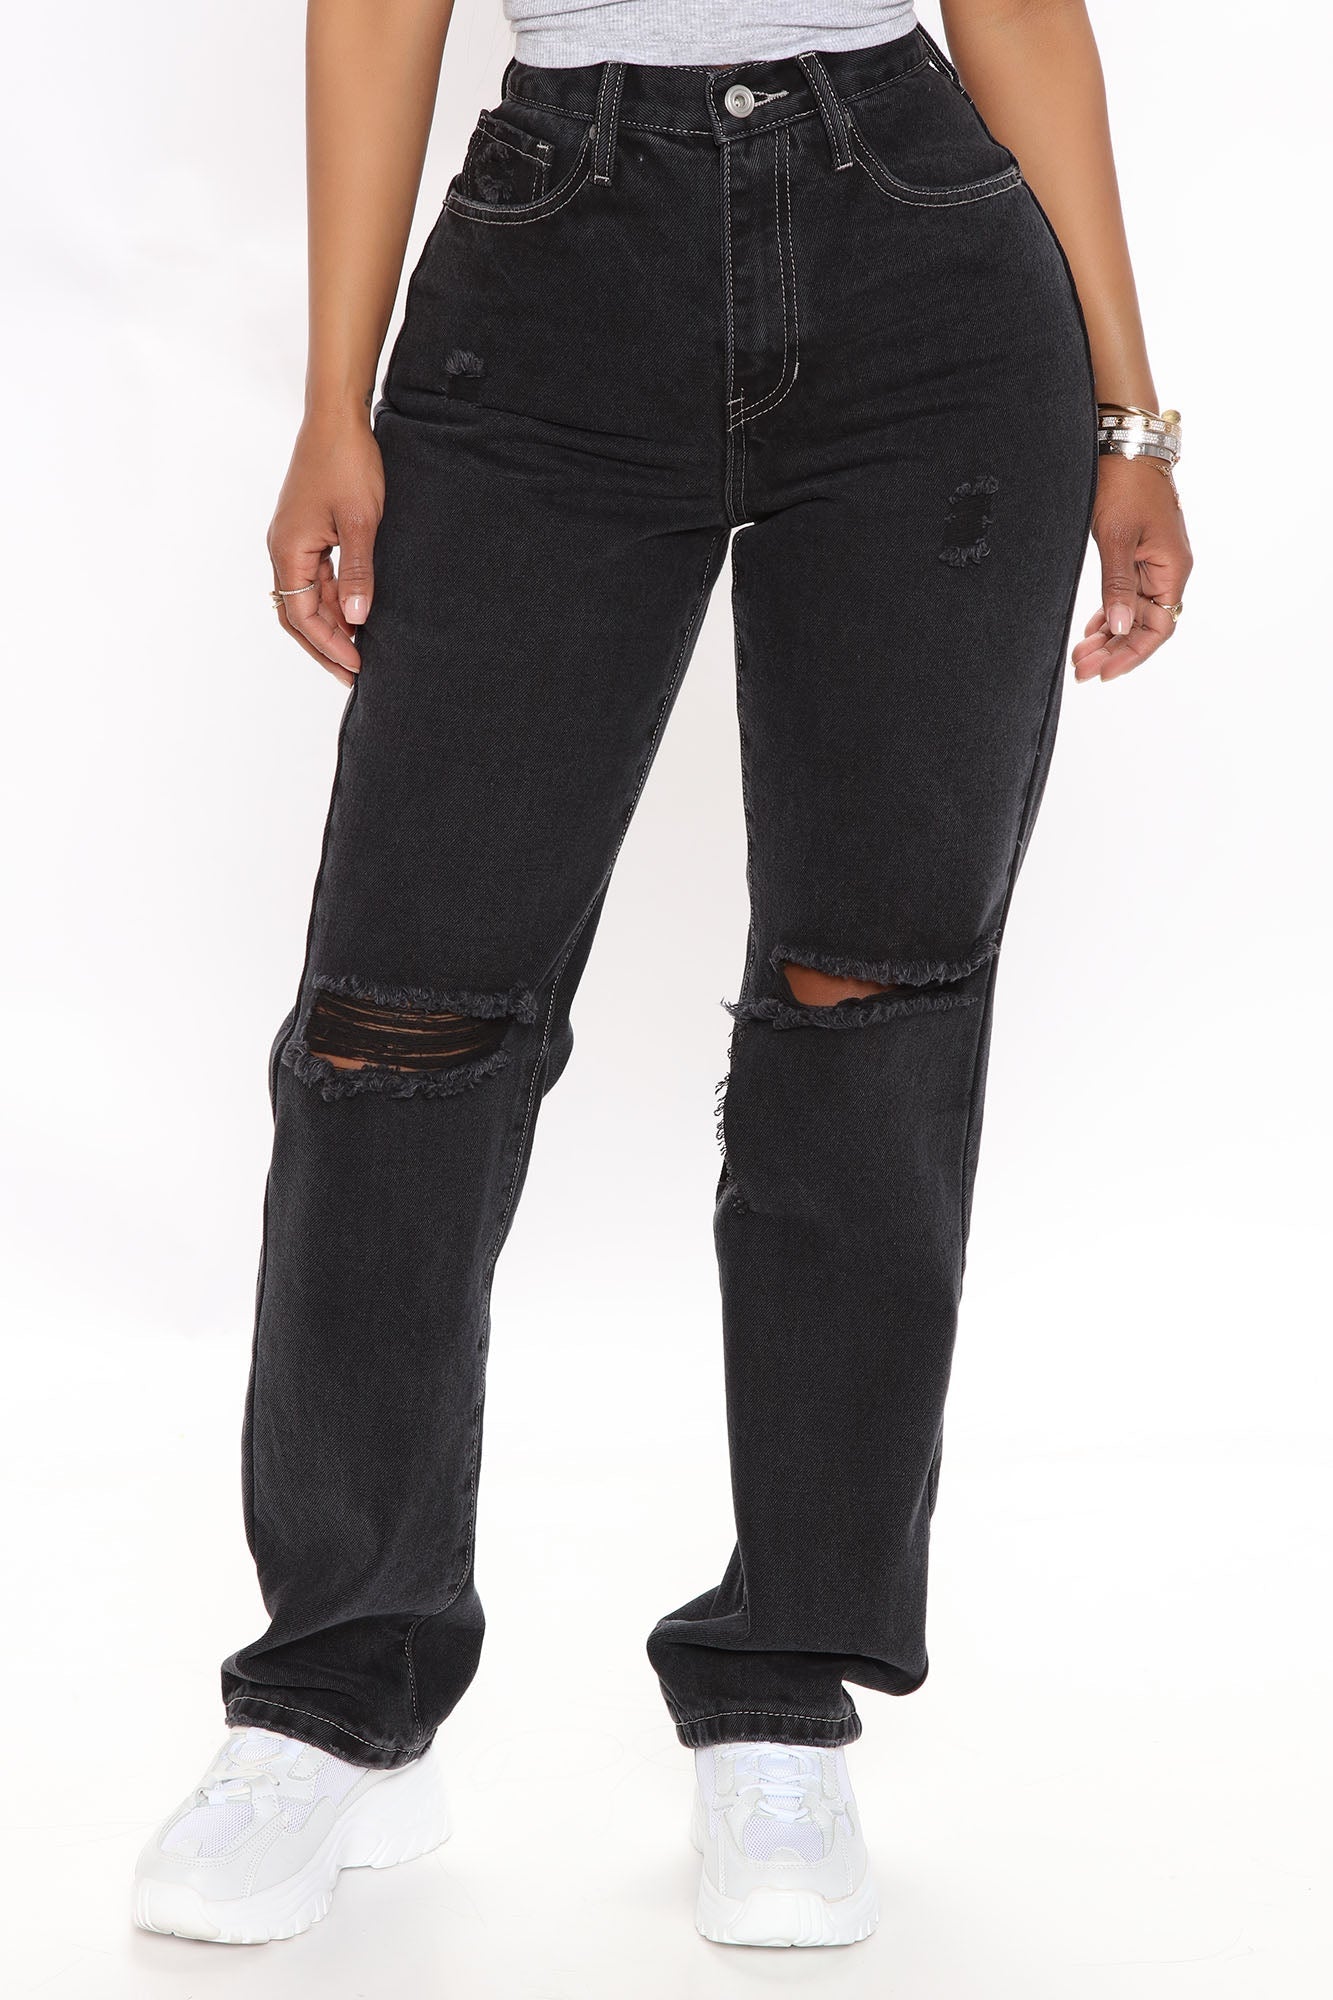 Leave It To Me Straight Leg Jeans - Black